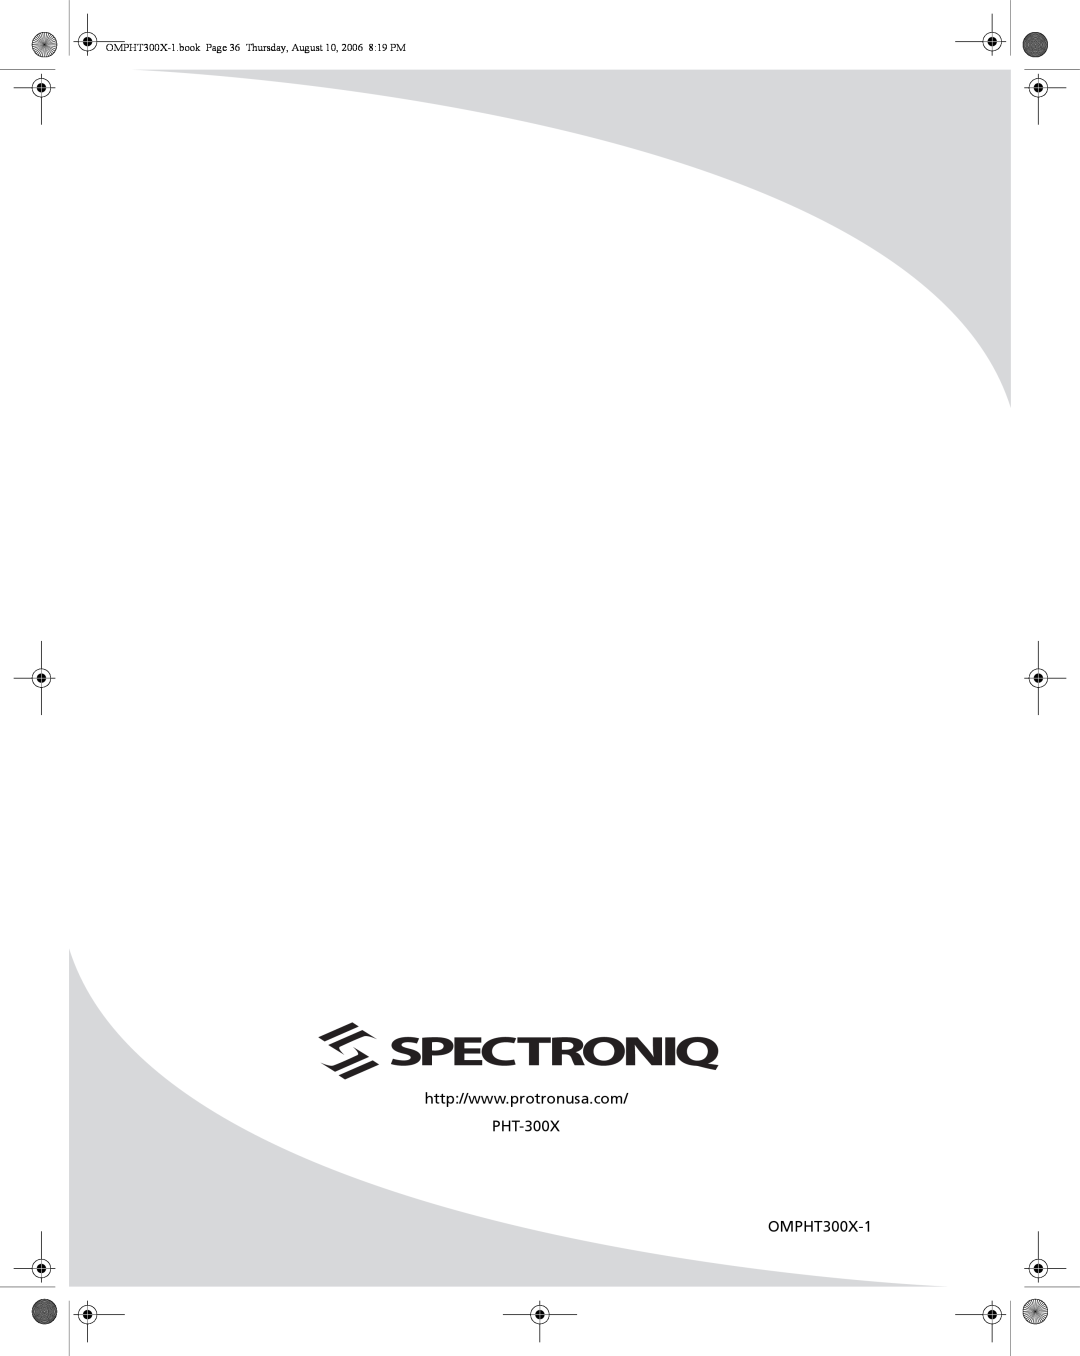 SpectronIQ PHT-300X user manual OMPHT300X-1 